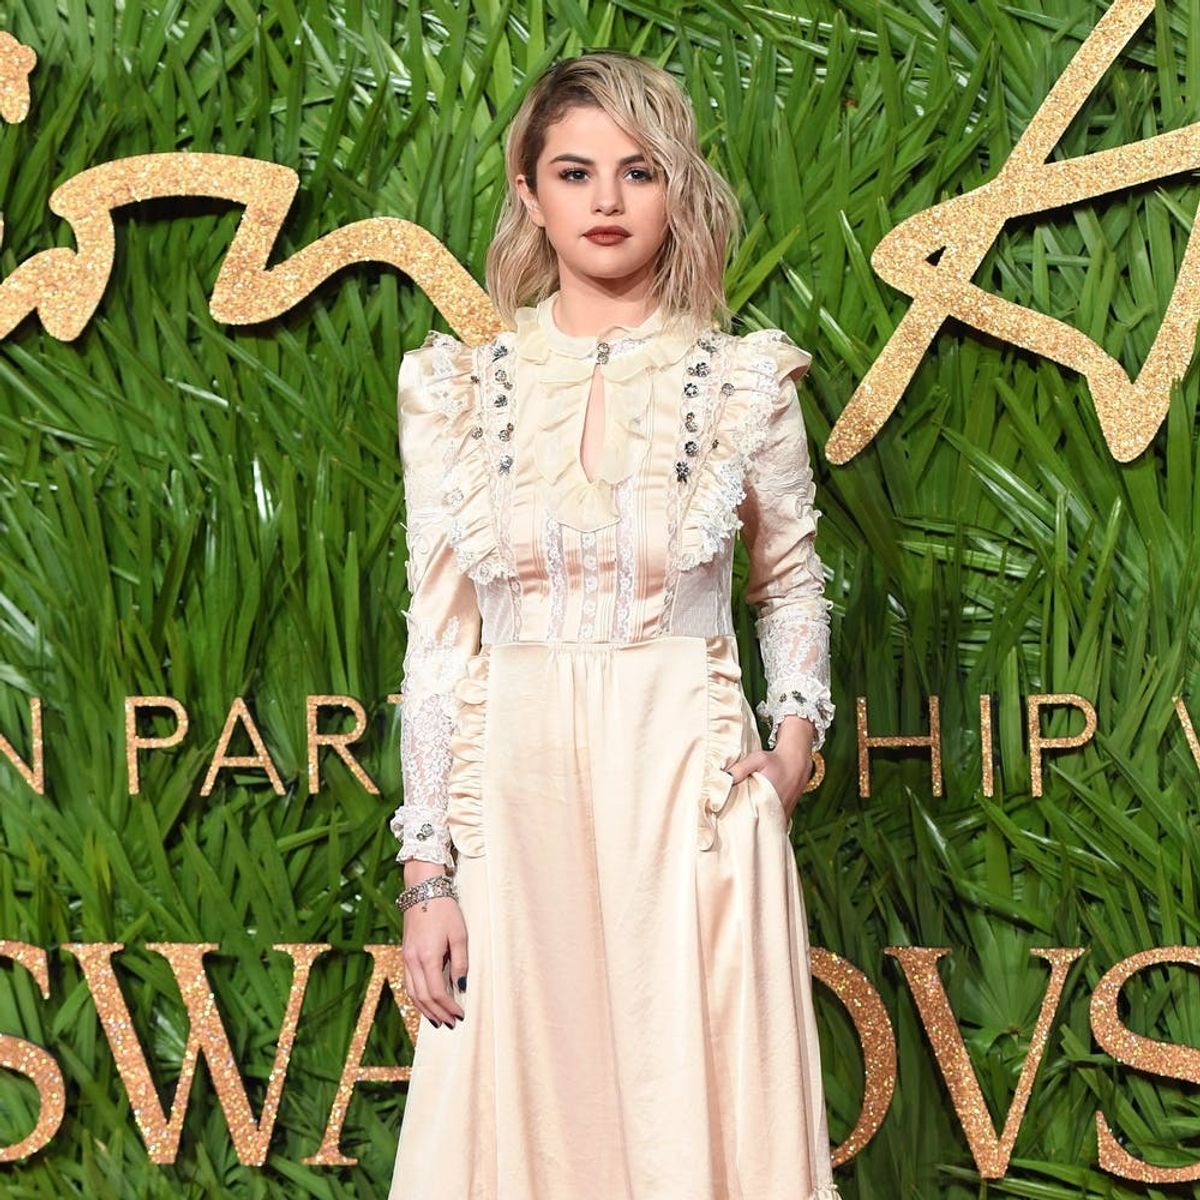 19 of Selena Gomez’s Boldest Fashion Choices for Off-Duty and Red Carpet Style